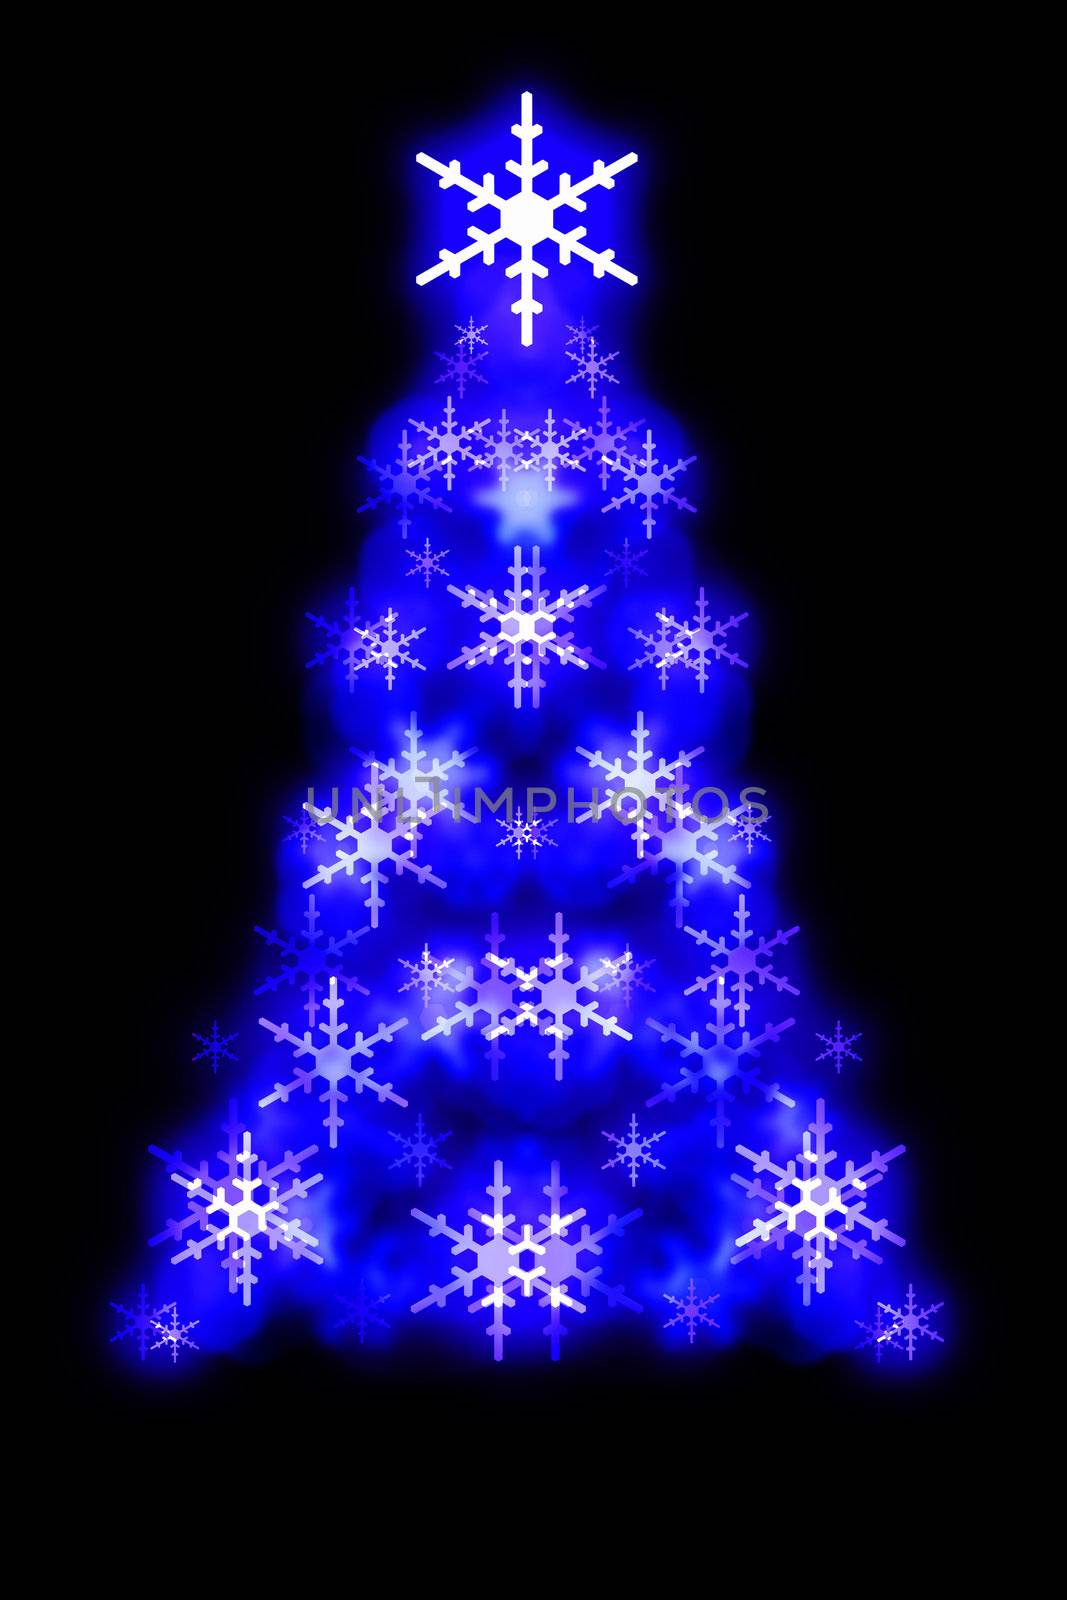 Symmetrical Christmas tree shape made up from glowing snowflake shapes